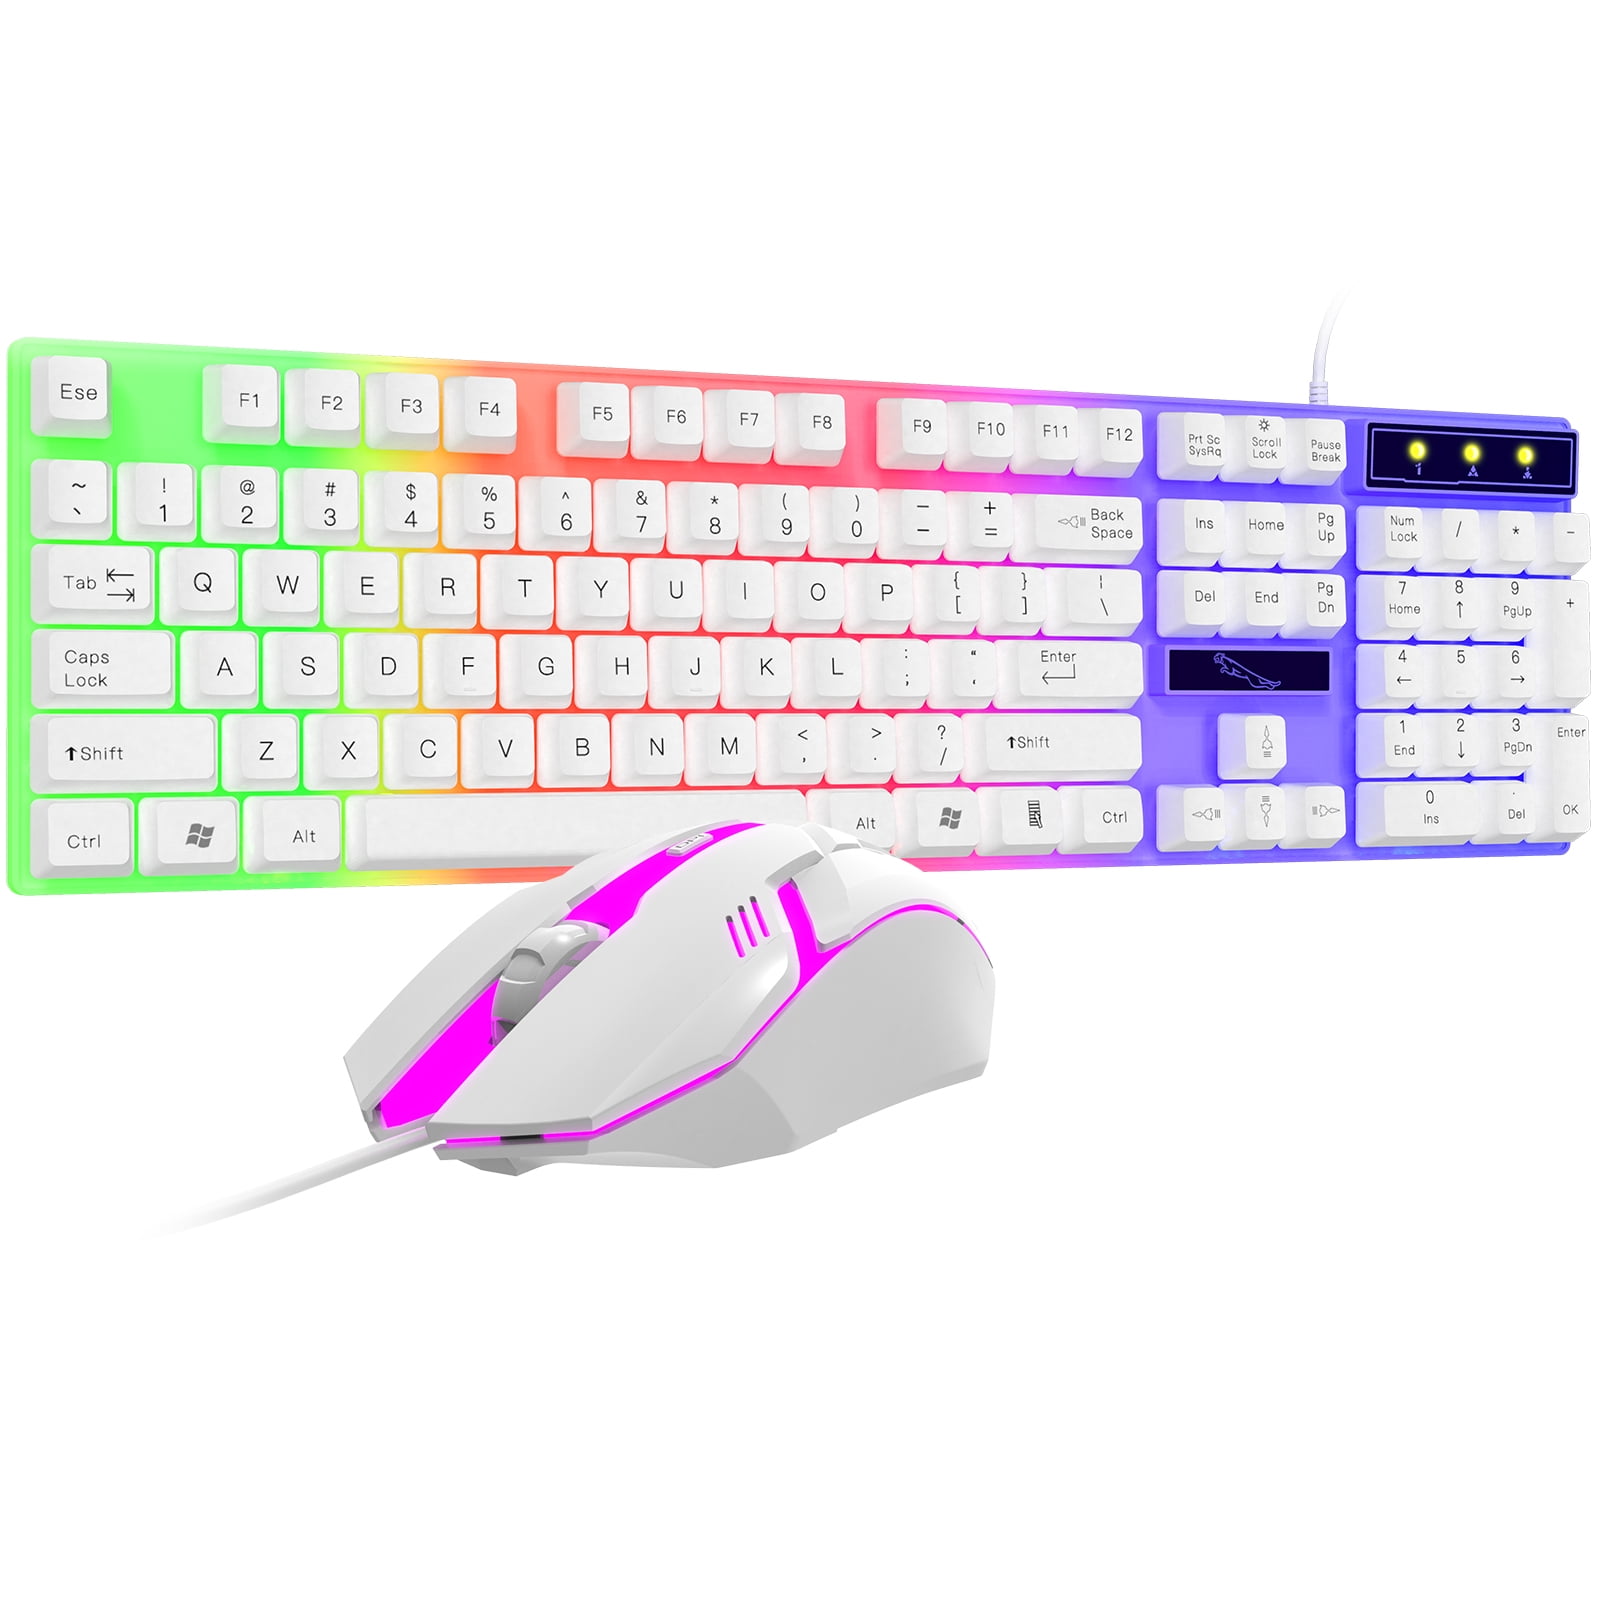 PS3 Xbox One and Xbox 360 Gaming Rainbow LED Keyboard Mouse Set Adapter for PS4 